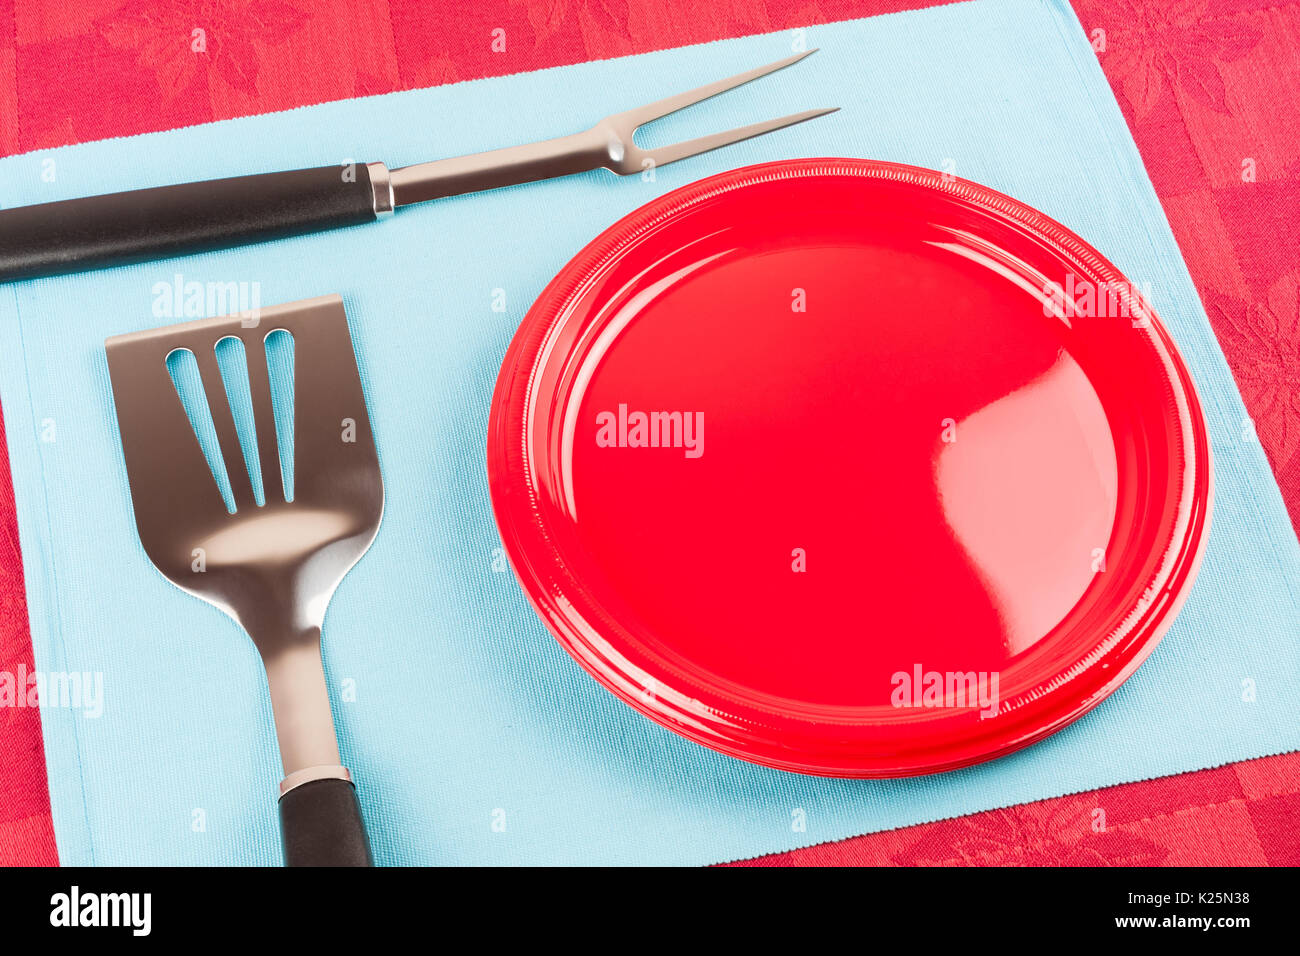 A set of barbecue tools and plastic plate on a blue cloth mat symbolizing barbecue time. Stock Photo